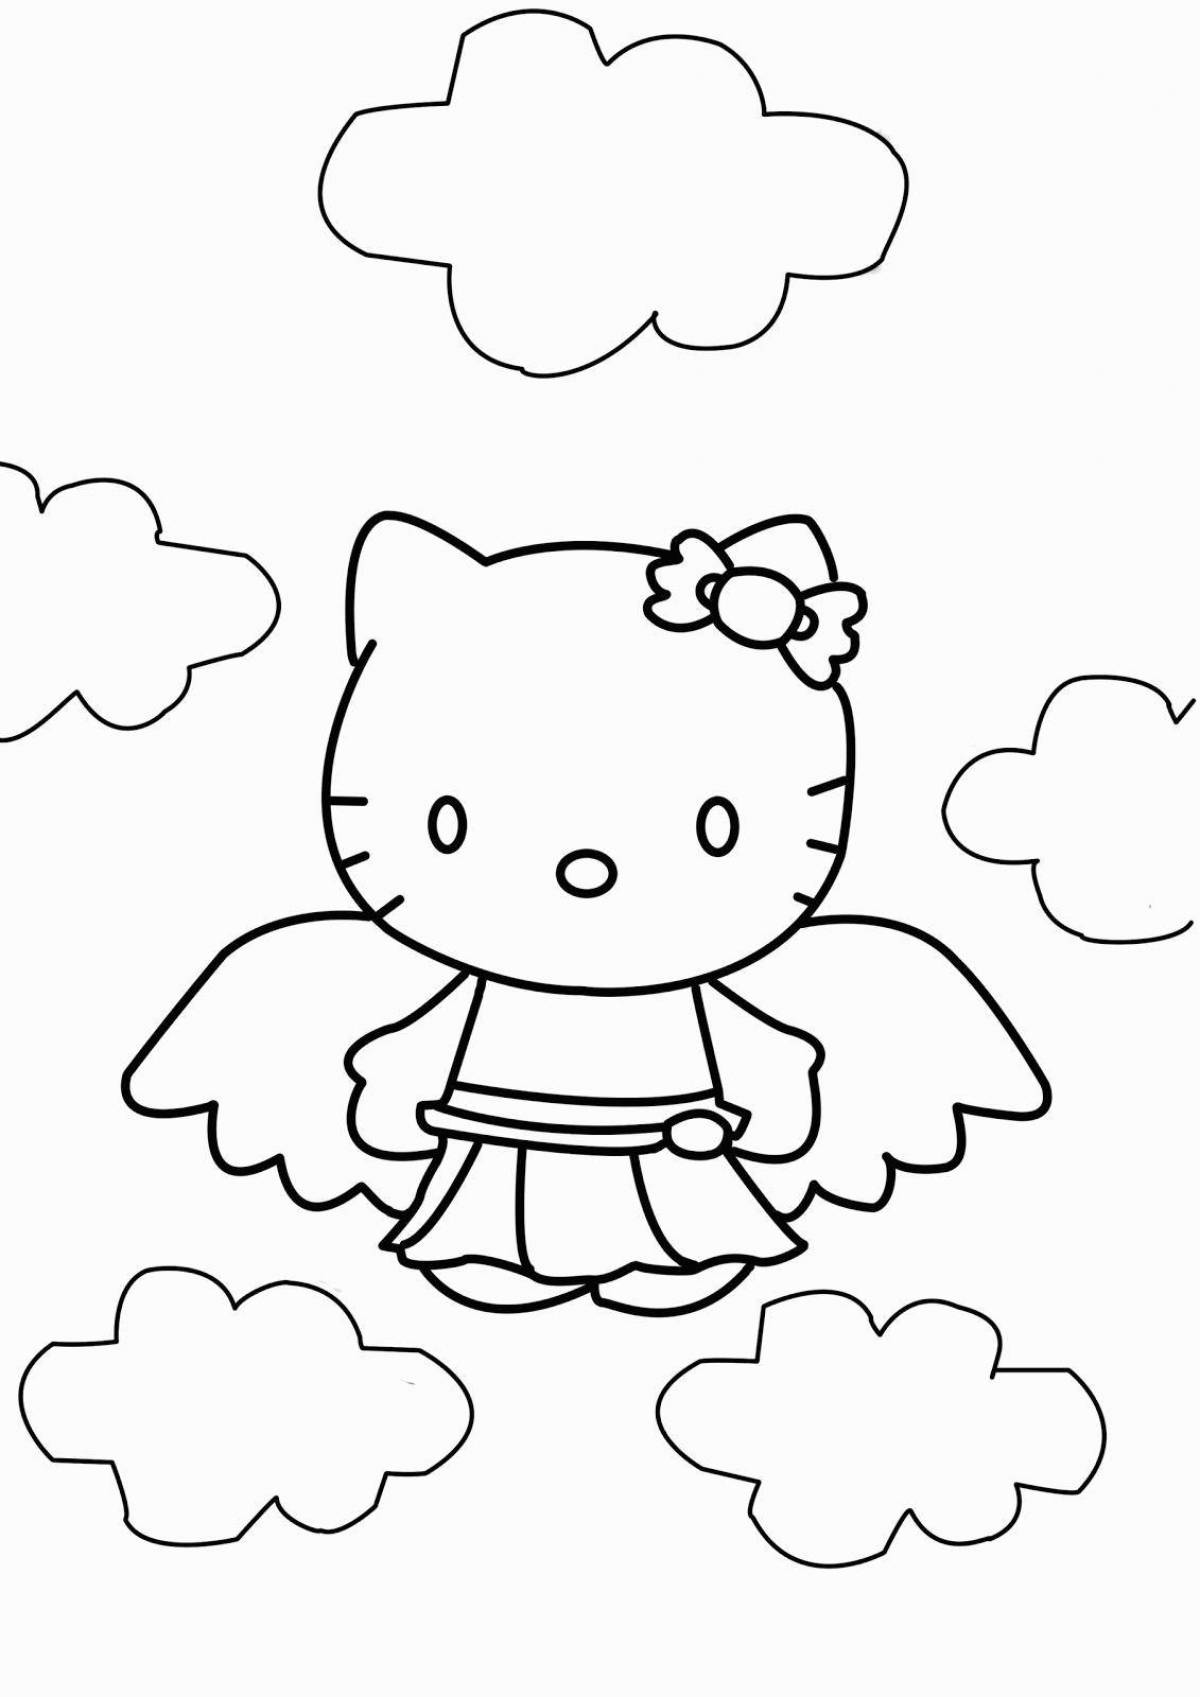 Colorful kitty chicken coloring book